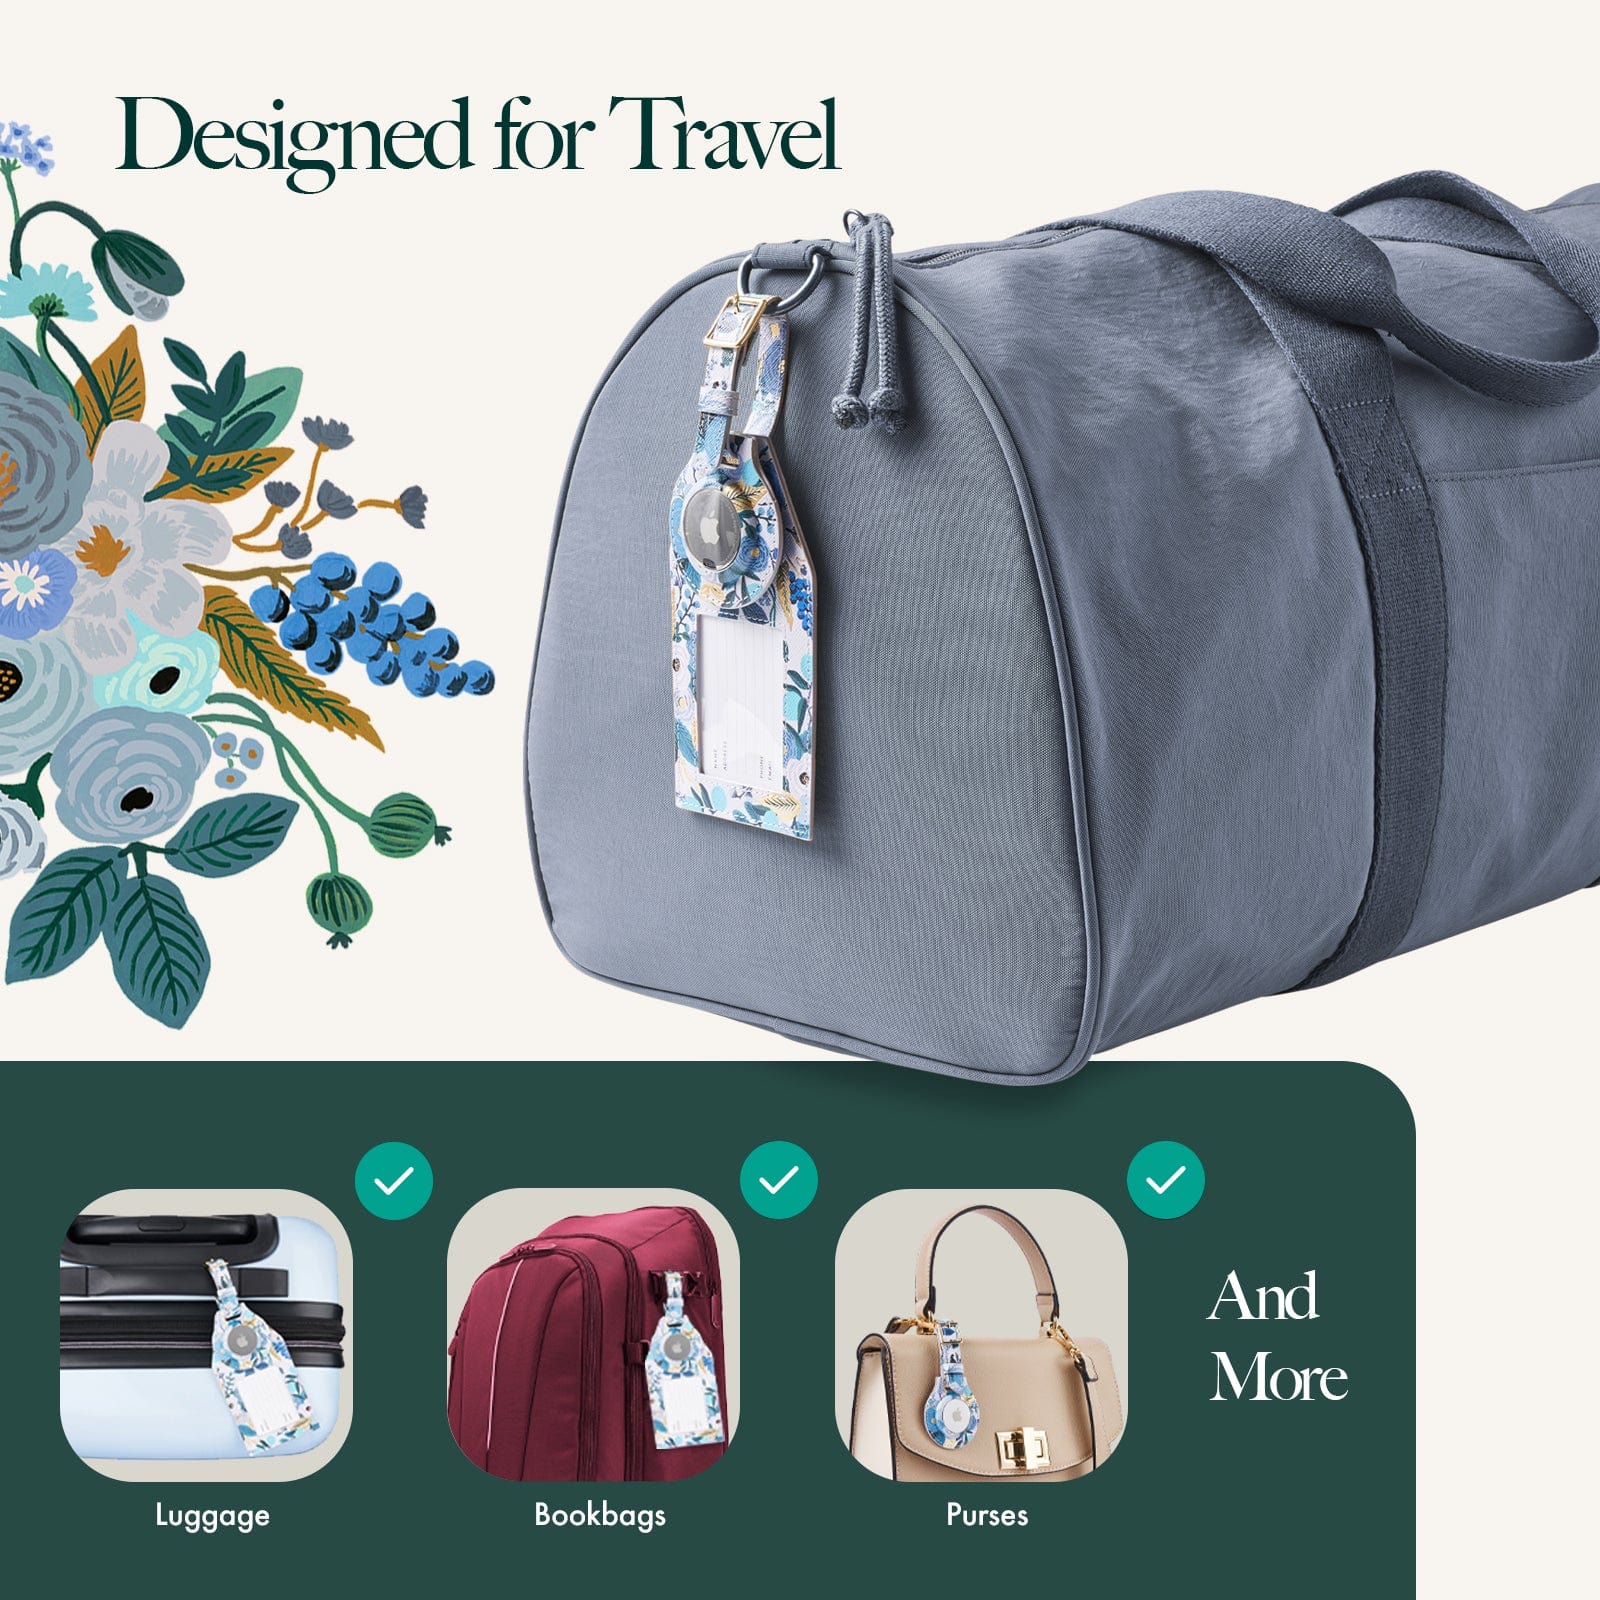 Designed for travel: Luggage, bookbags, purses, and more!